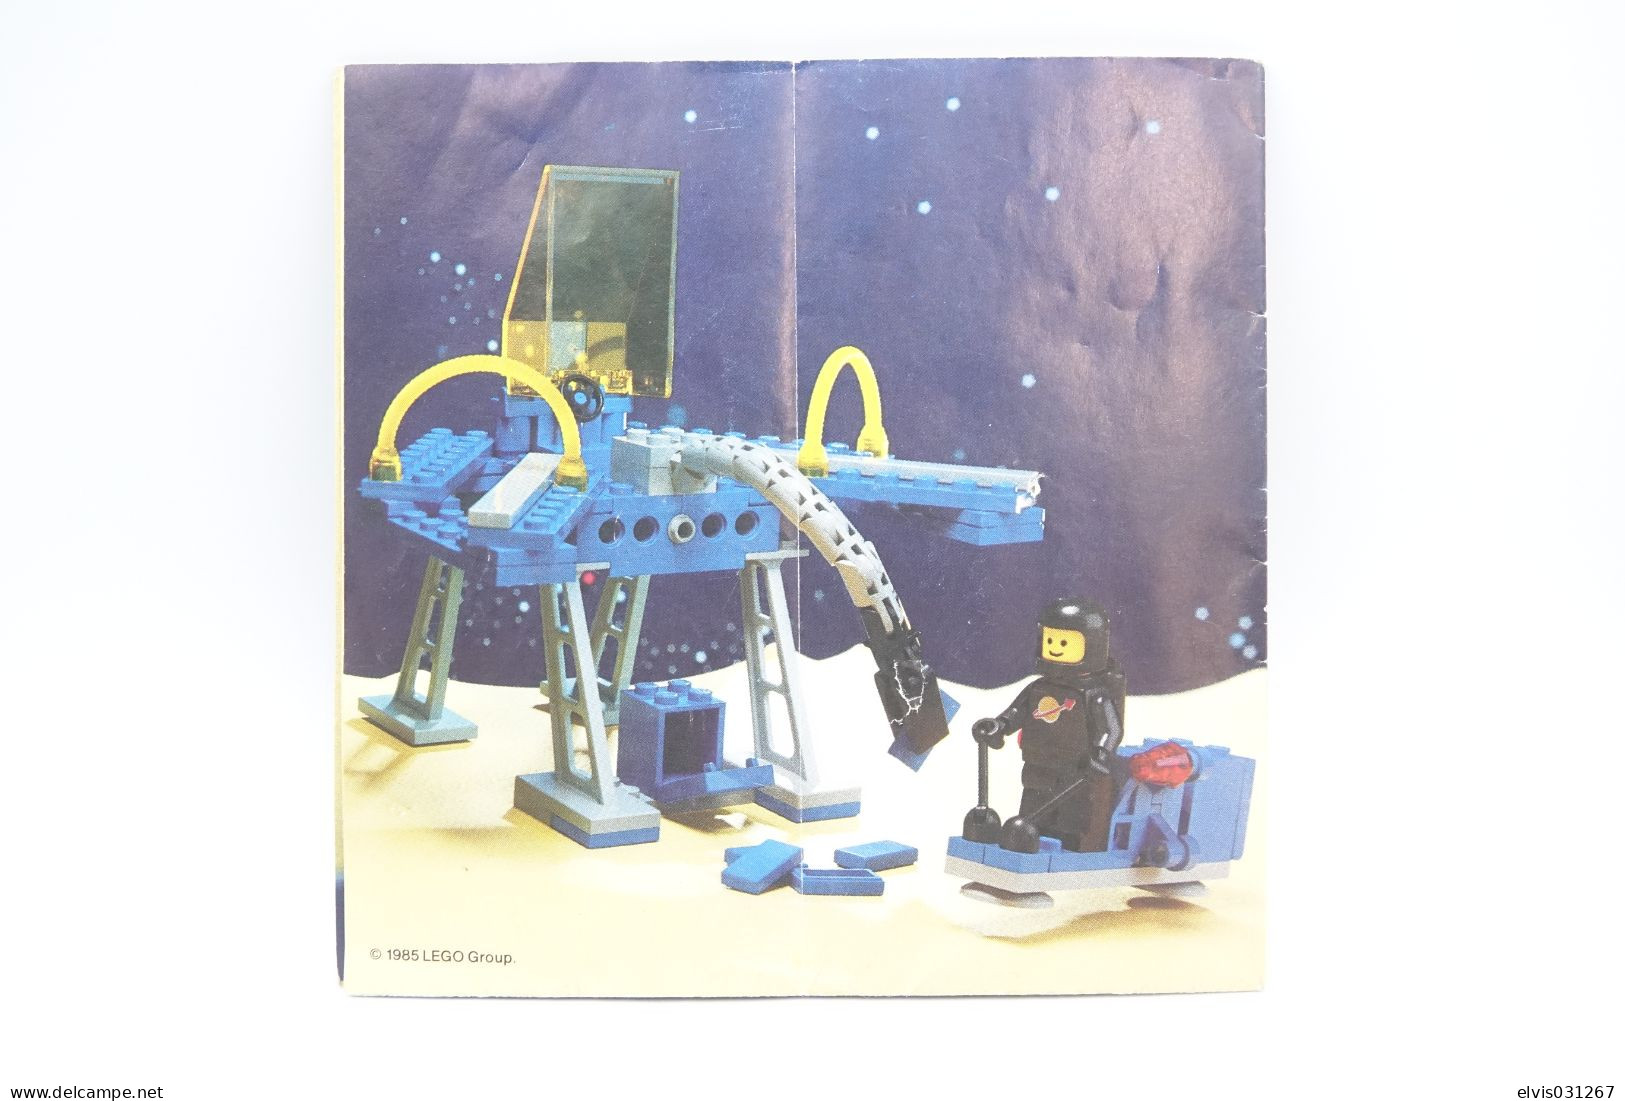 LEGO - 6882 Walking Astro Grappler With Instruction Manual - Original Lego 1985 - Vintage - Catalogues